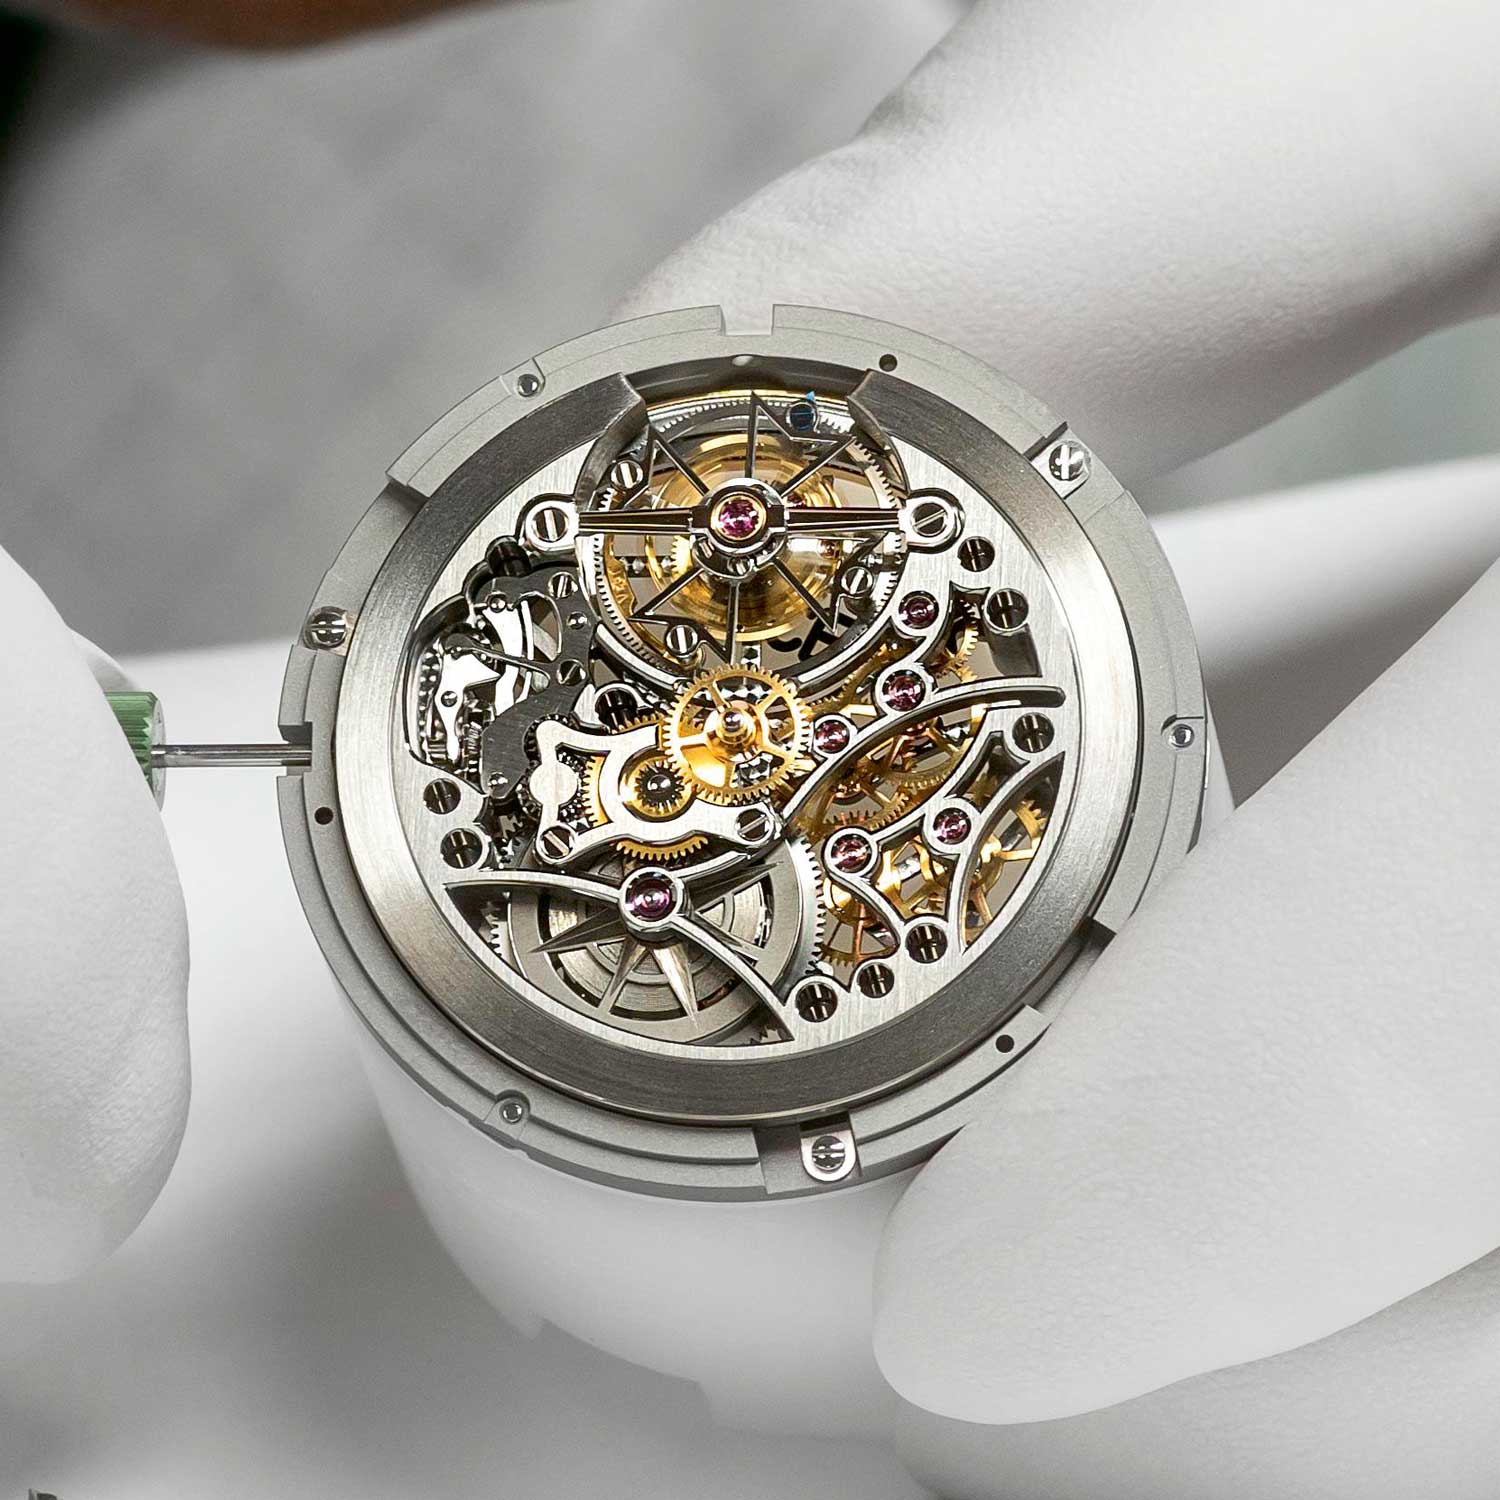 The intricate decoration on Vacheron’s watches